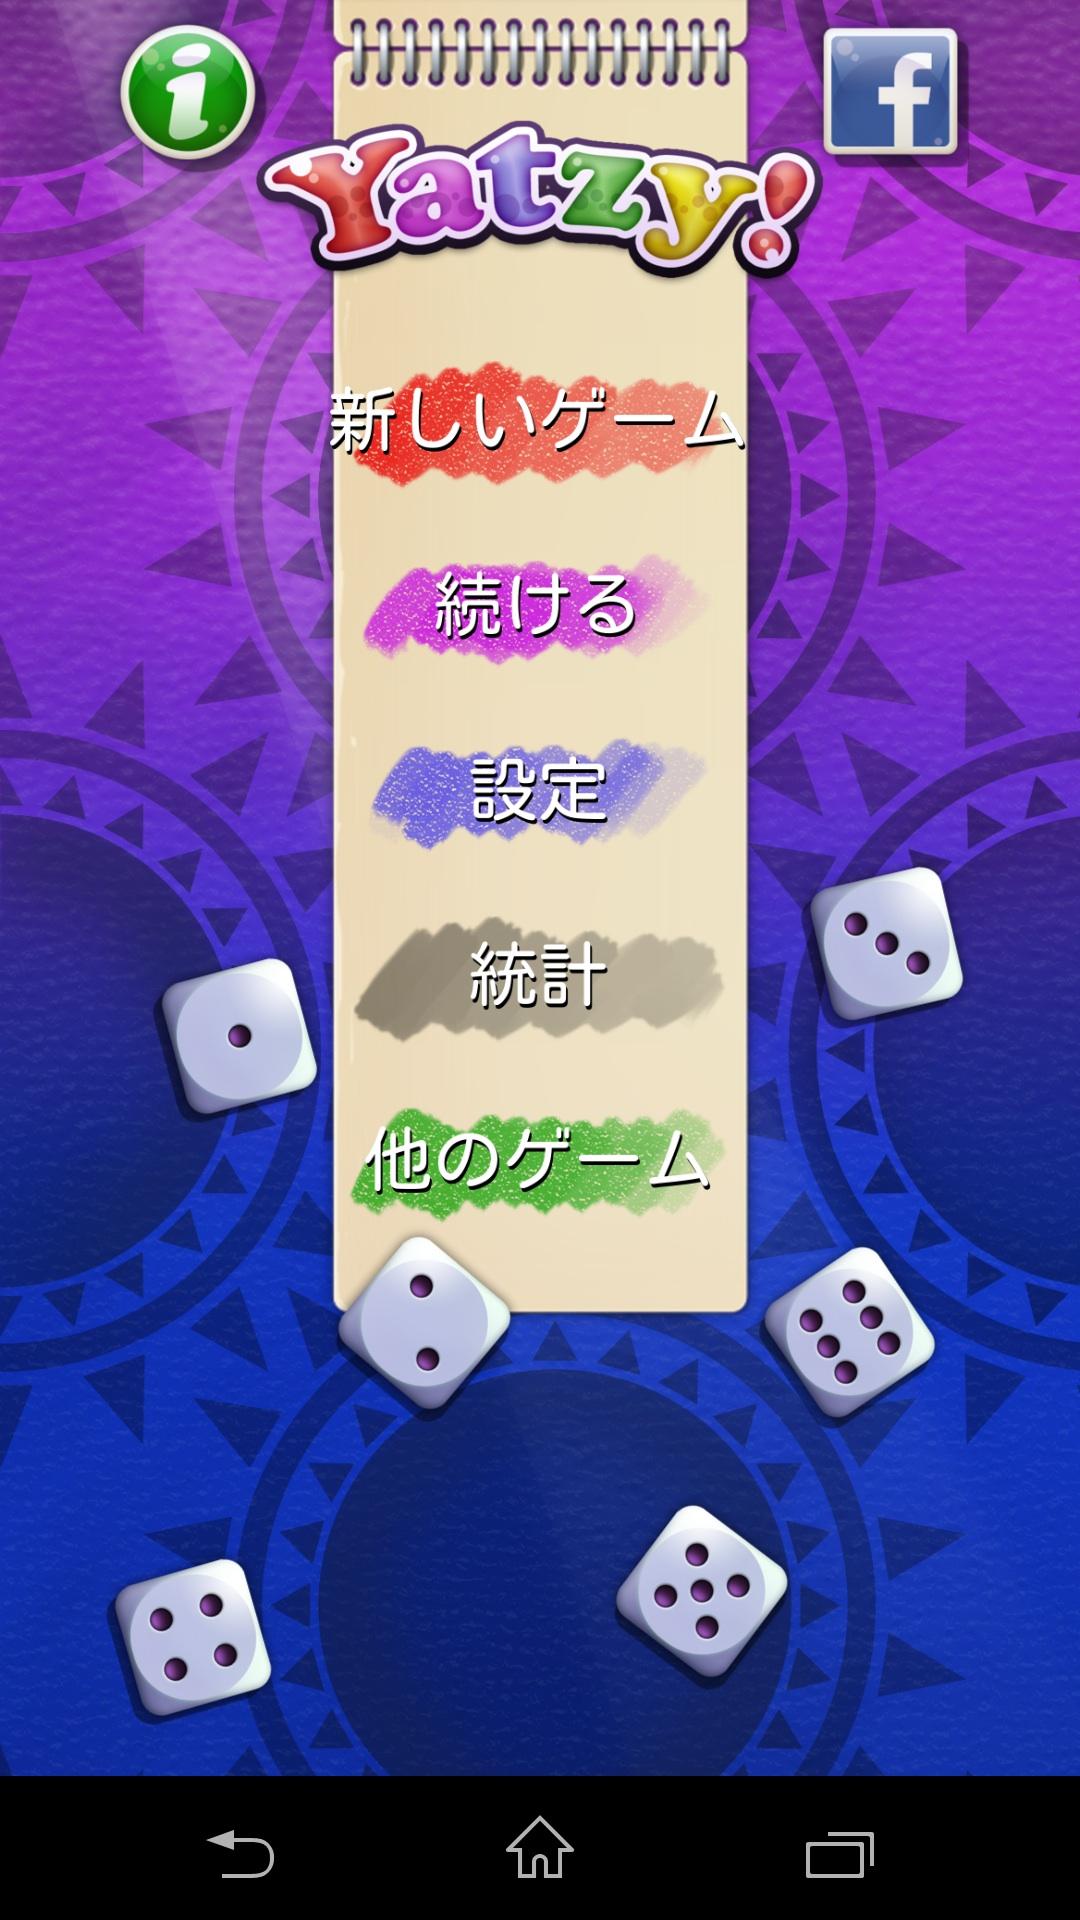 Android application Yatzy Multiplayer Dice Game screenshort